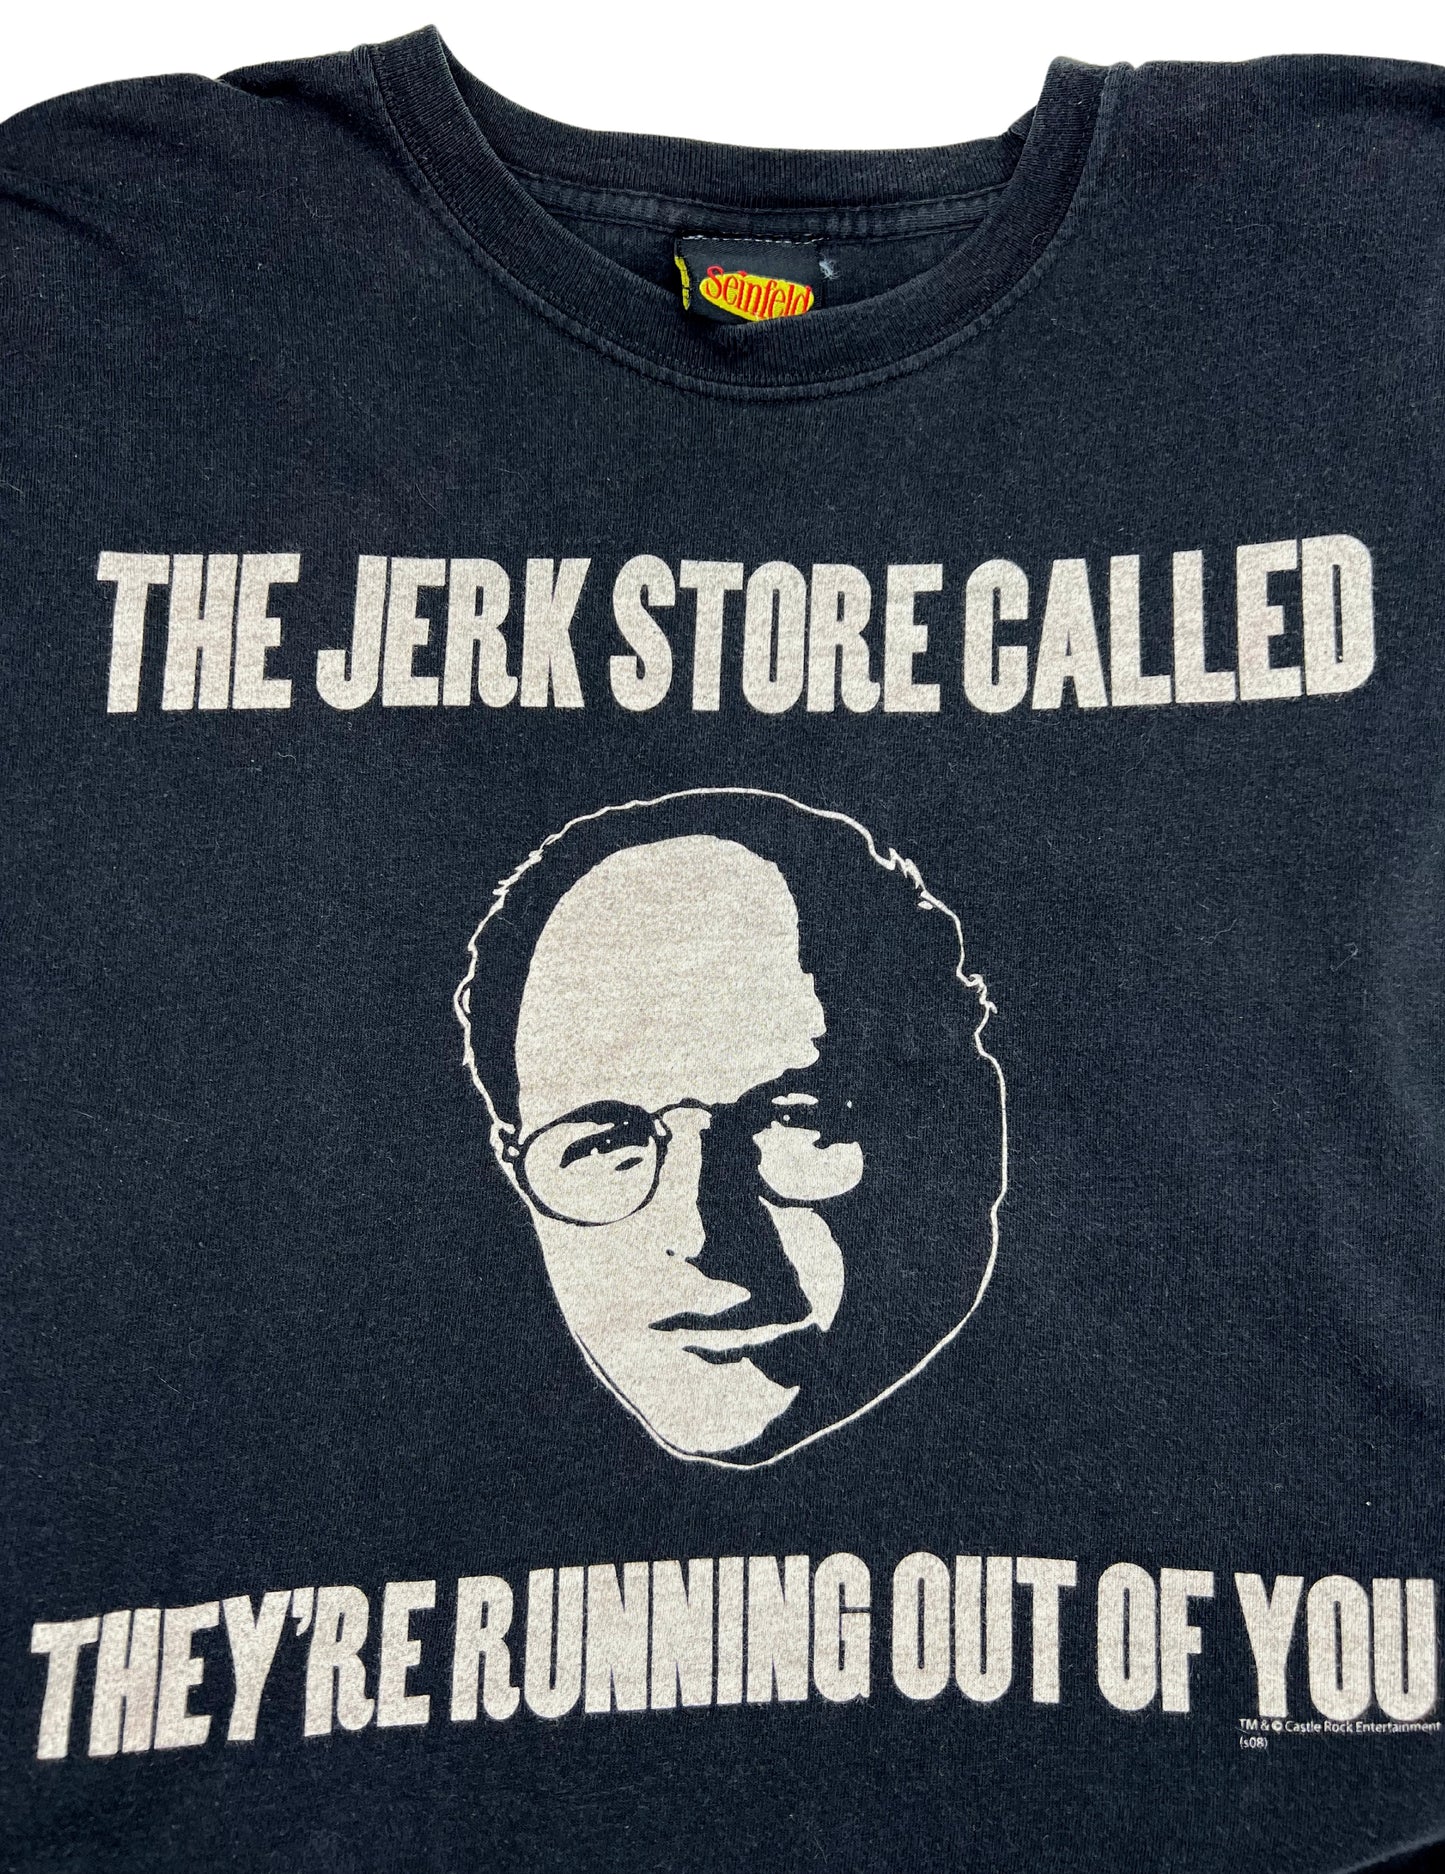 00s Seinfeld The Jerk Store Called George Costanza T-shirt Size XL